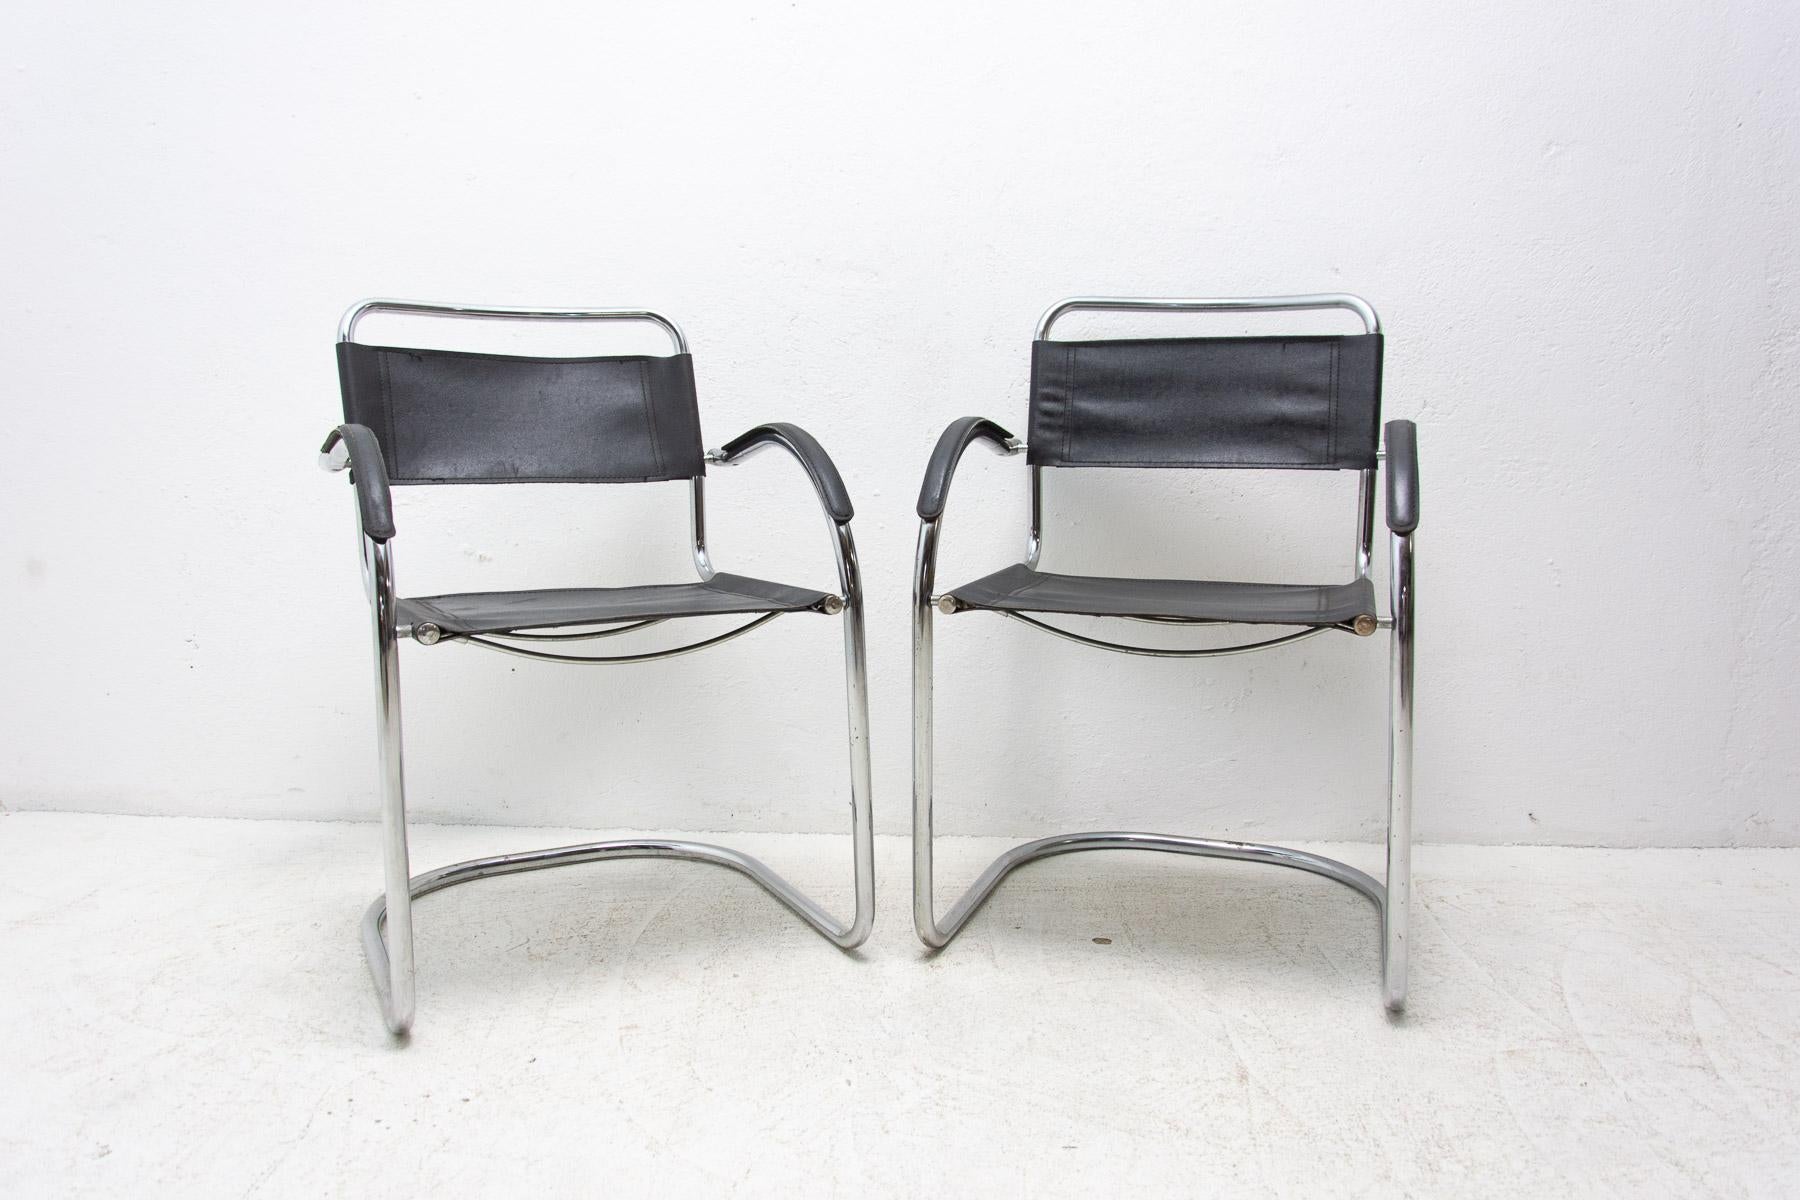 Pair of Cantilever tubular steel armchairs. Made in the 1970's. Material: leather, chrome. In good Vintage condition, showing signs of age and using. Price is for the pair.

Measures: height: 83 cm

width: 56 cm

depth: 55 cm

seat height :